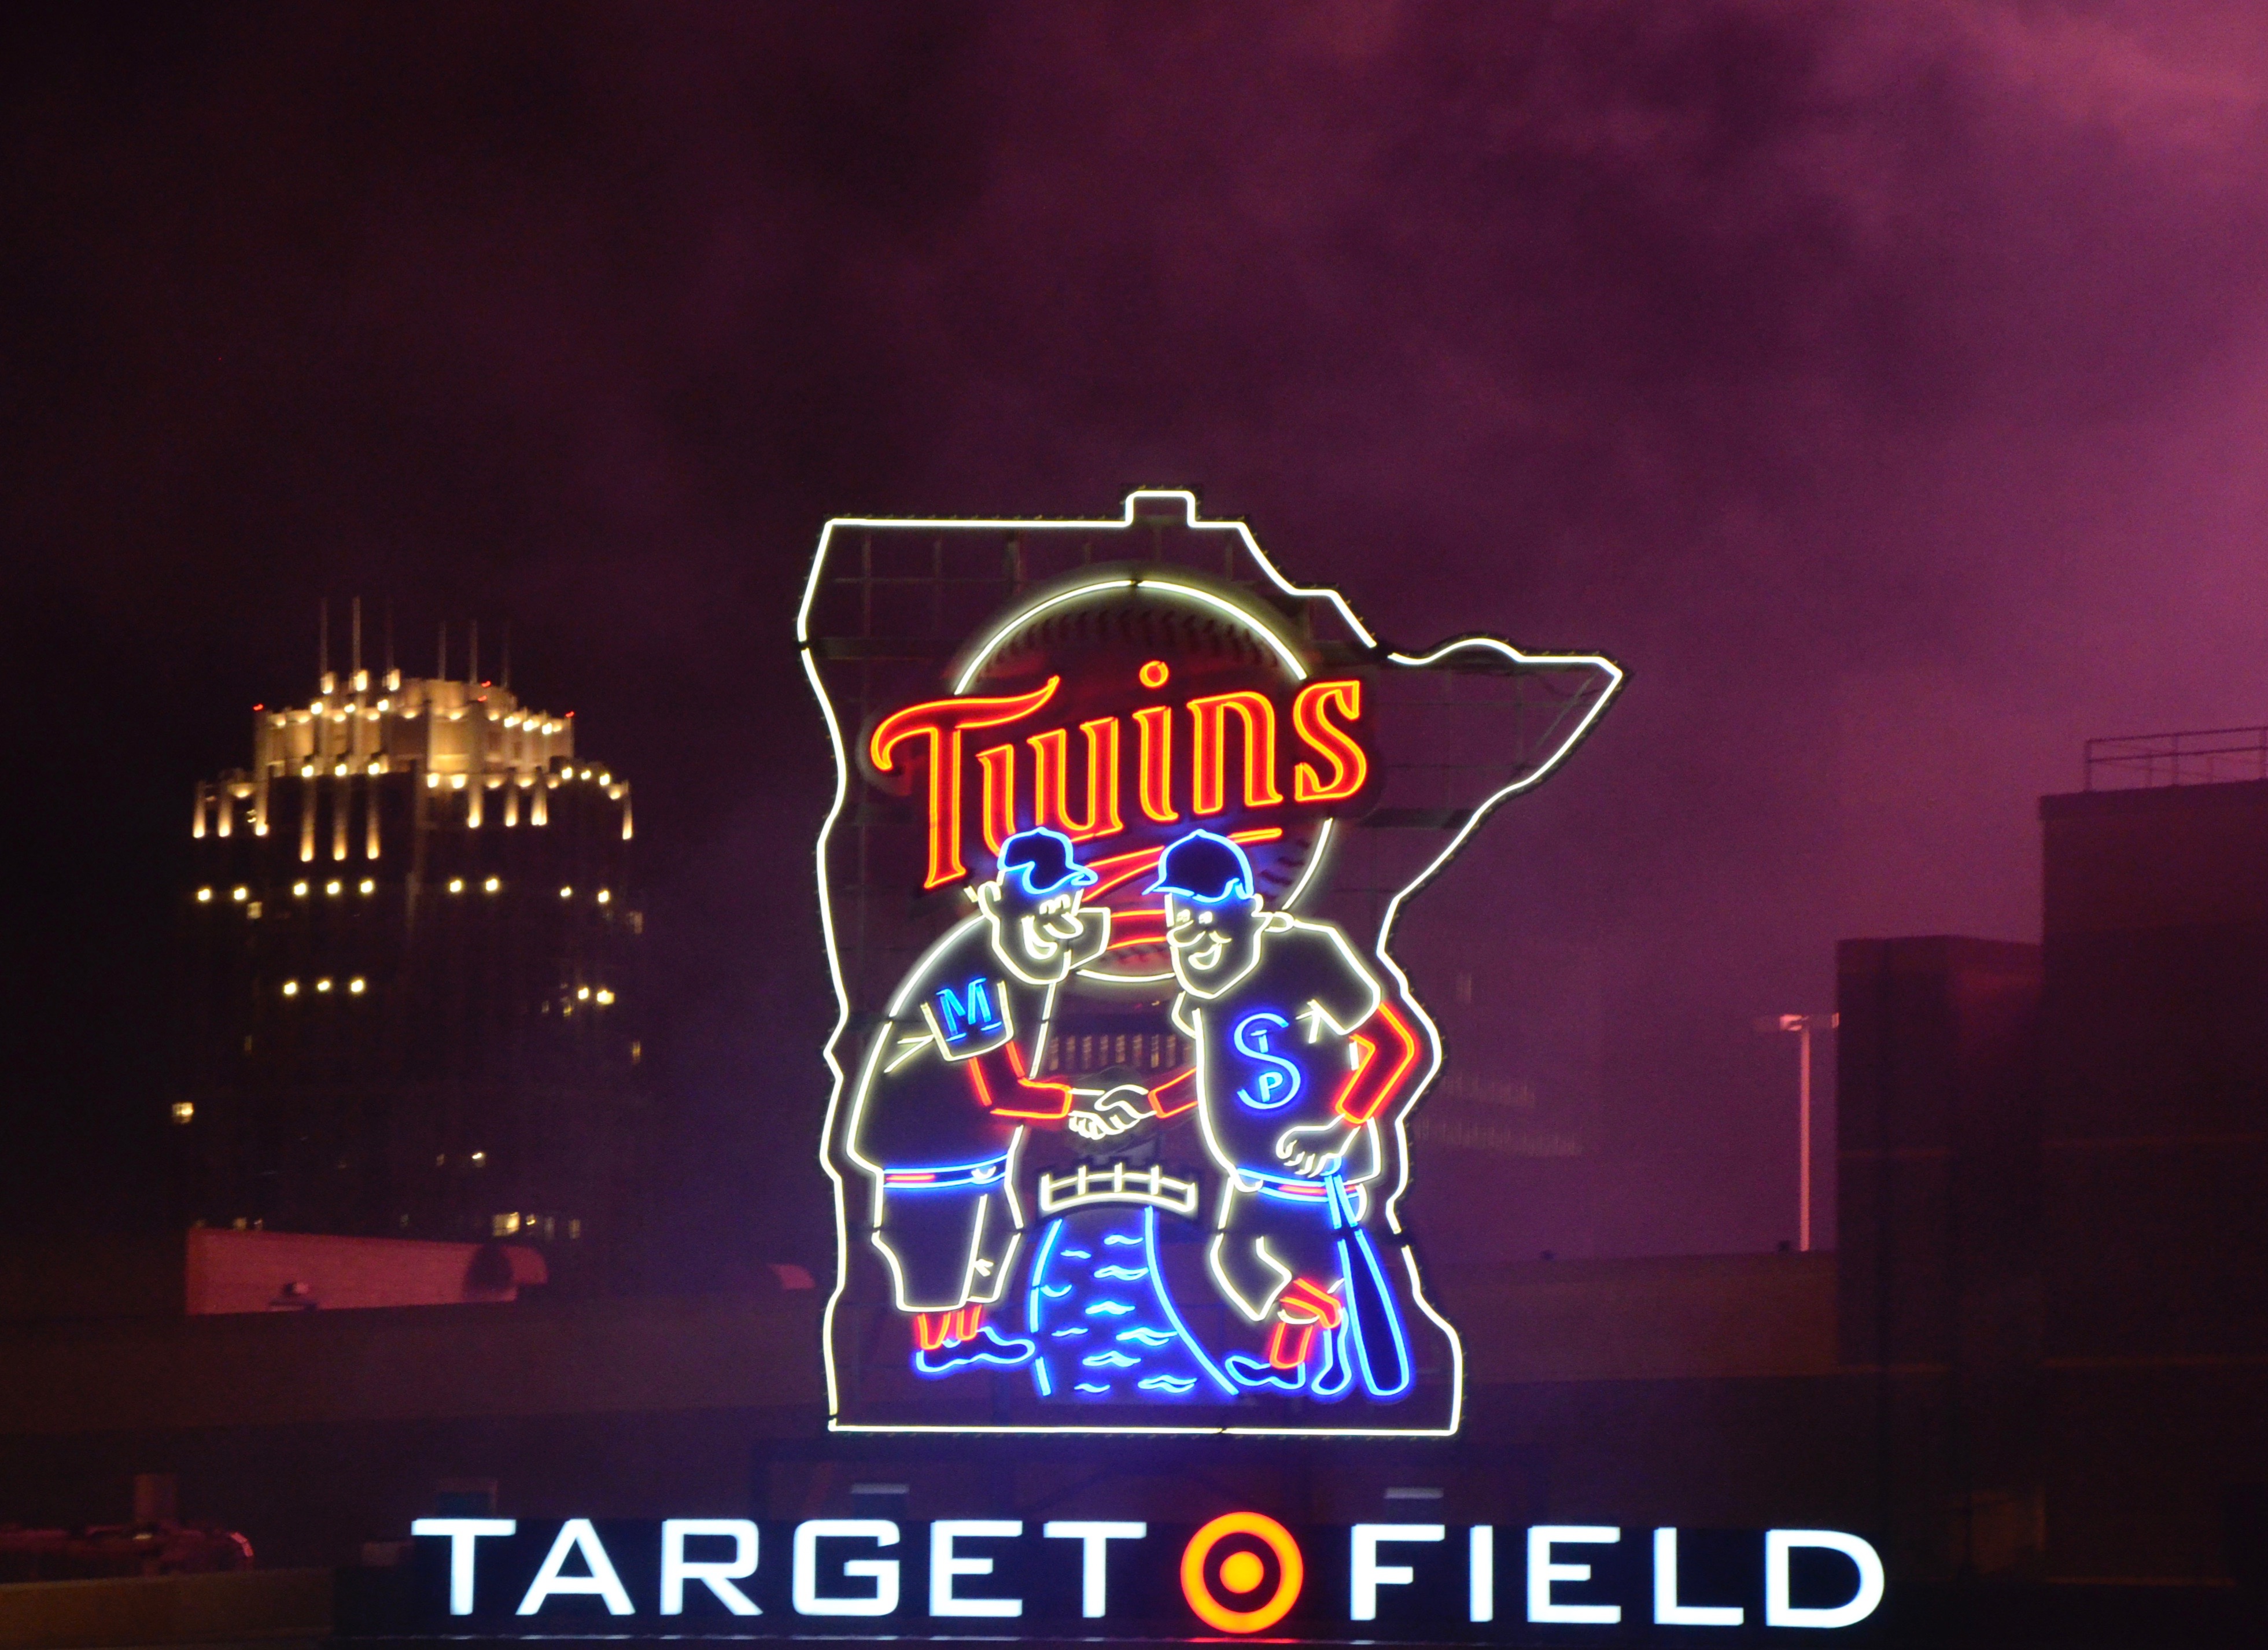 Twins sign after the fireworks